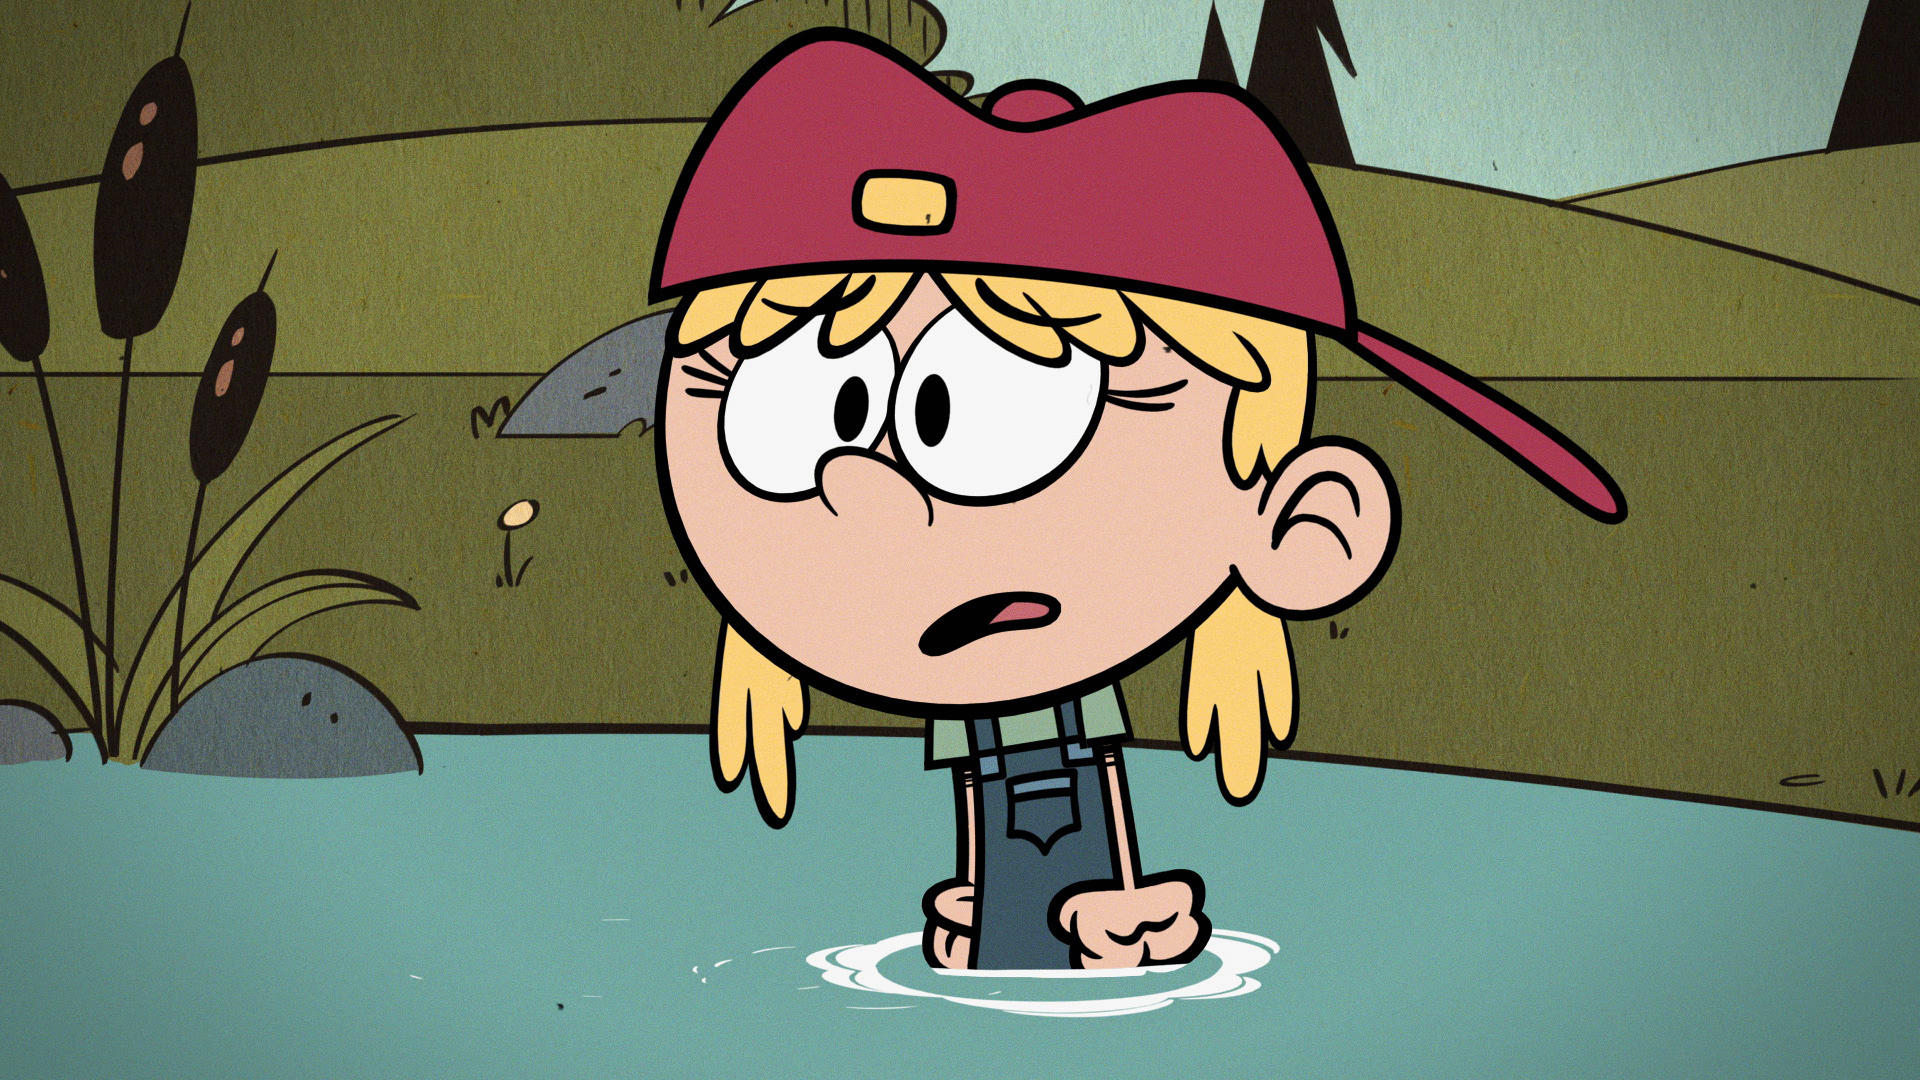 The loud house 2. The Loud House no such luck. The Loud House no such luck crrepepacta. The Loud House no such luck Creepypasta.